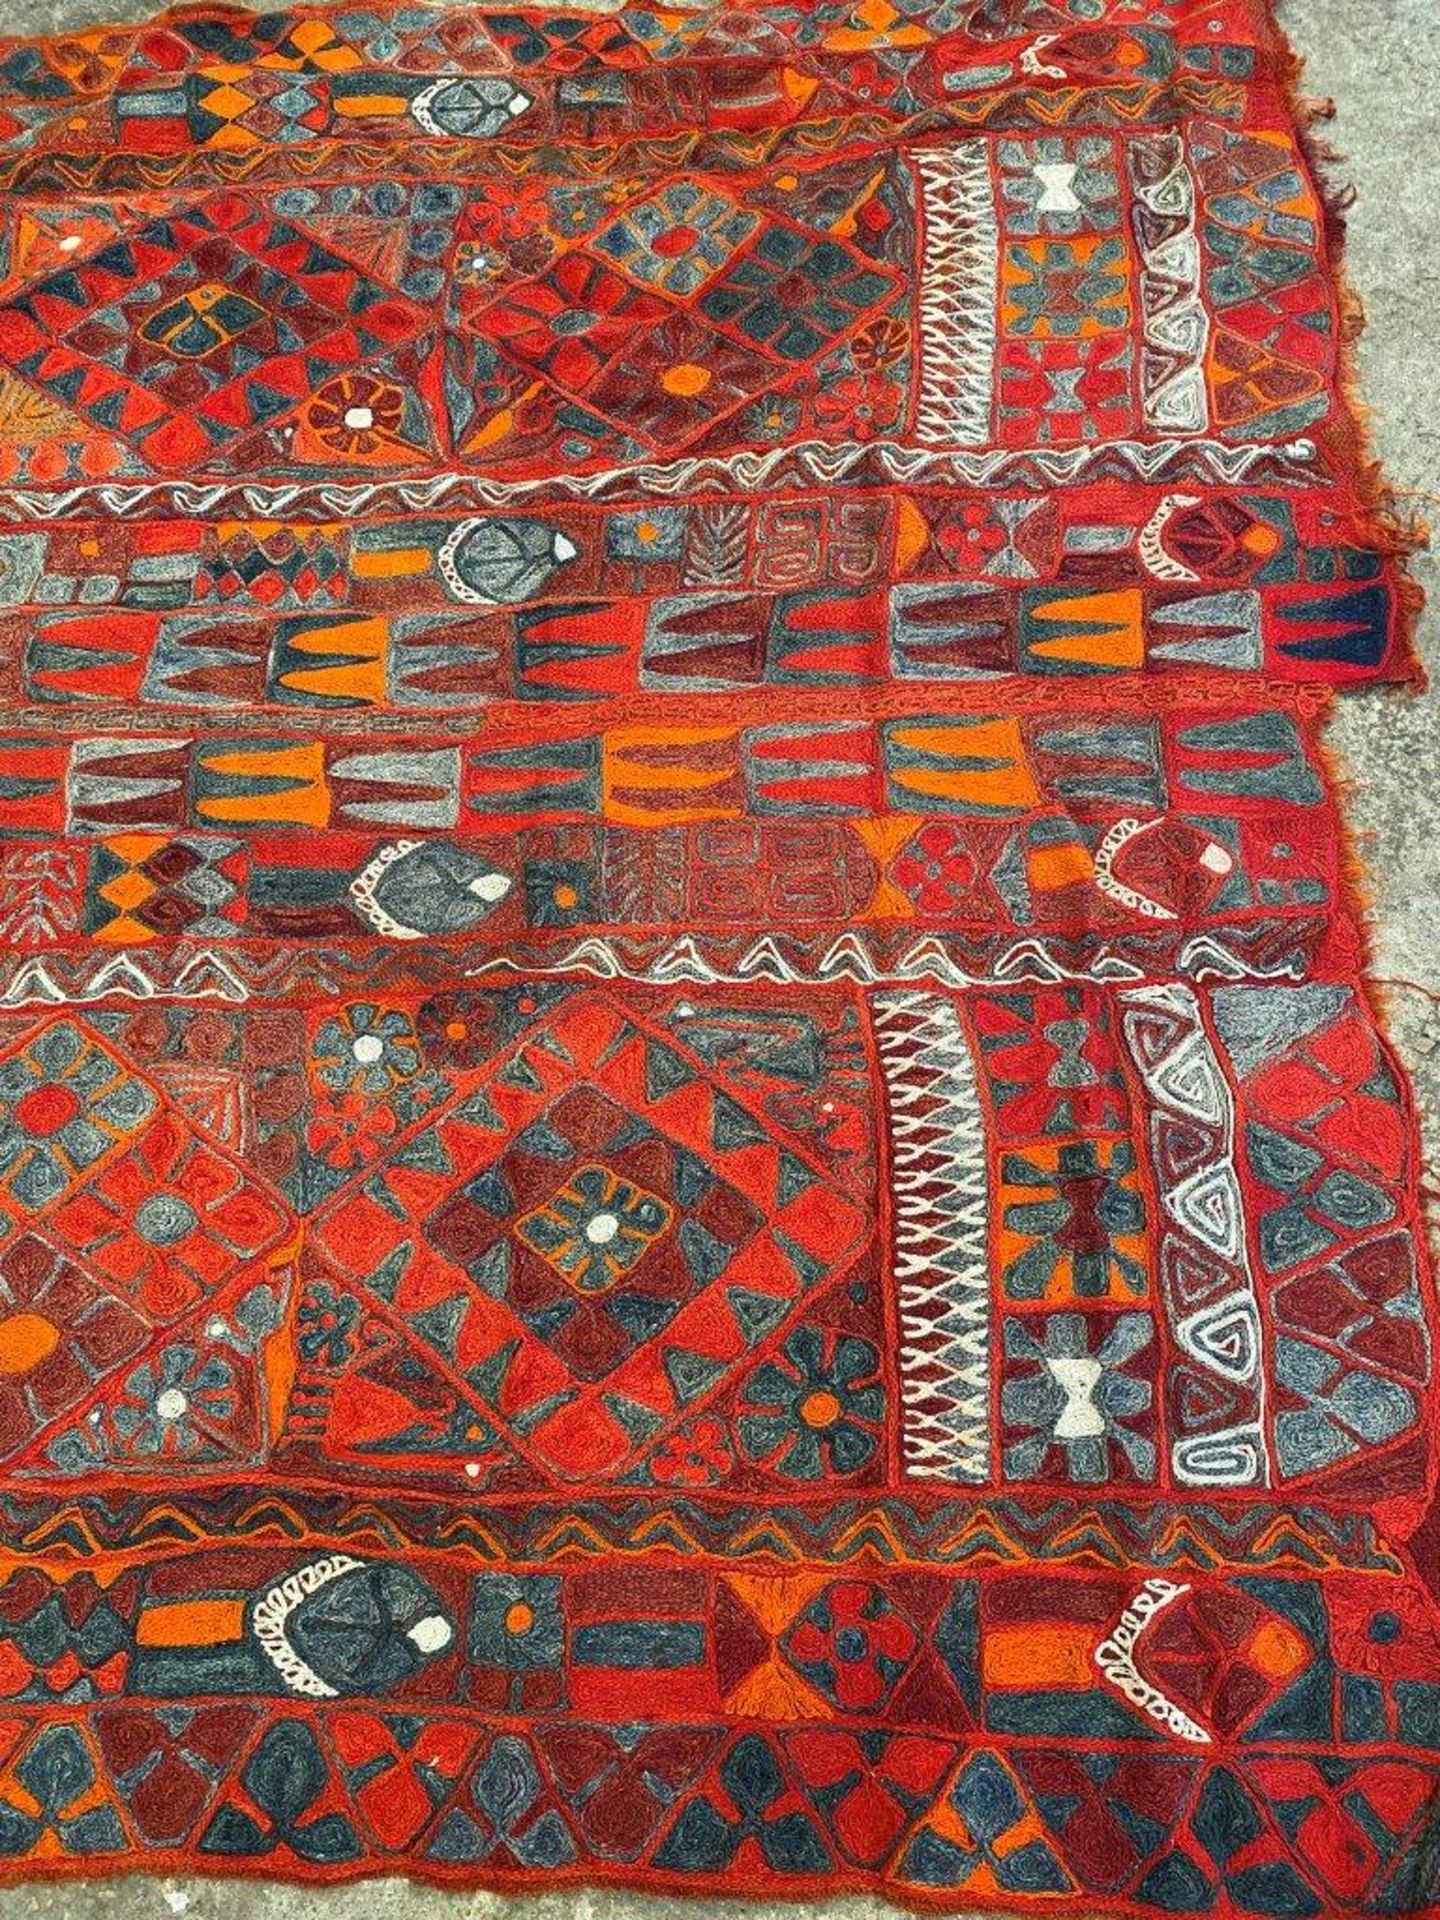 Hand made red ground rug - Image 3 of 3